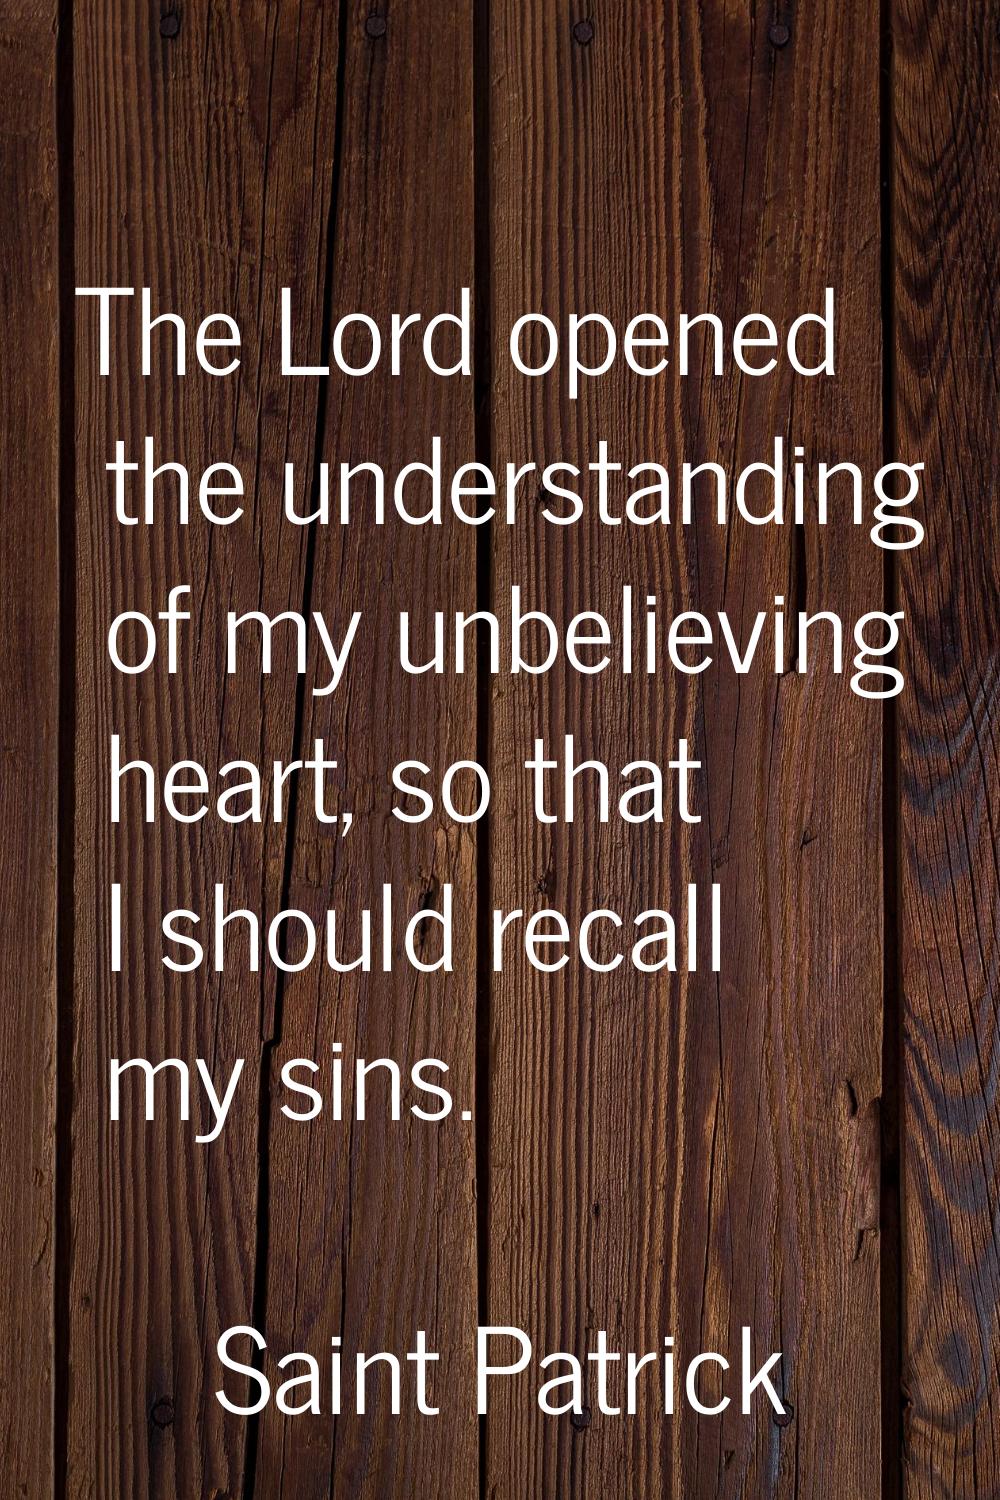 The Lord opened the understanding of my unbelieving heart, so that I should recall my sins.